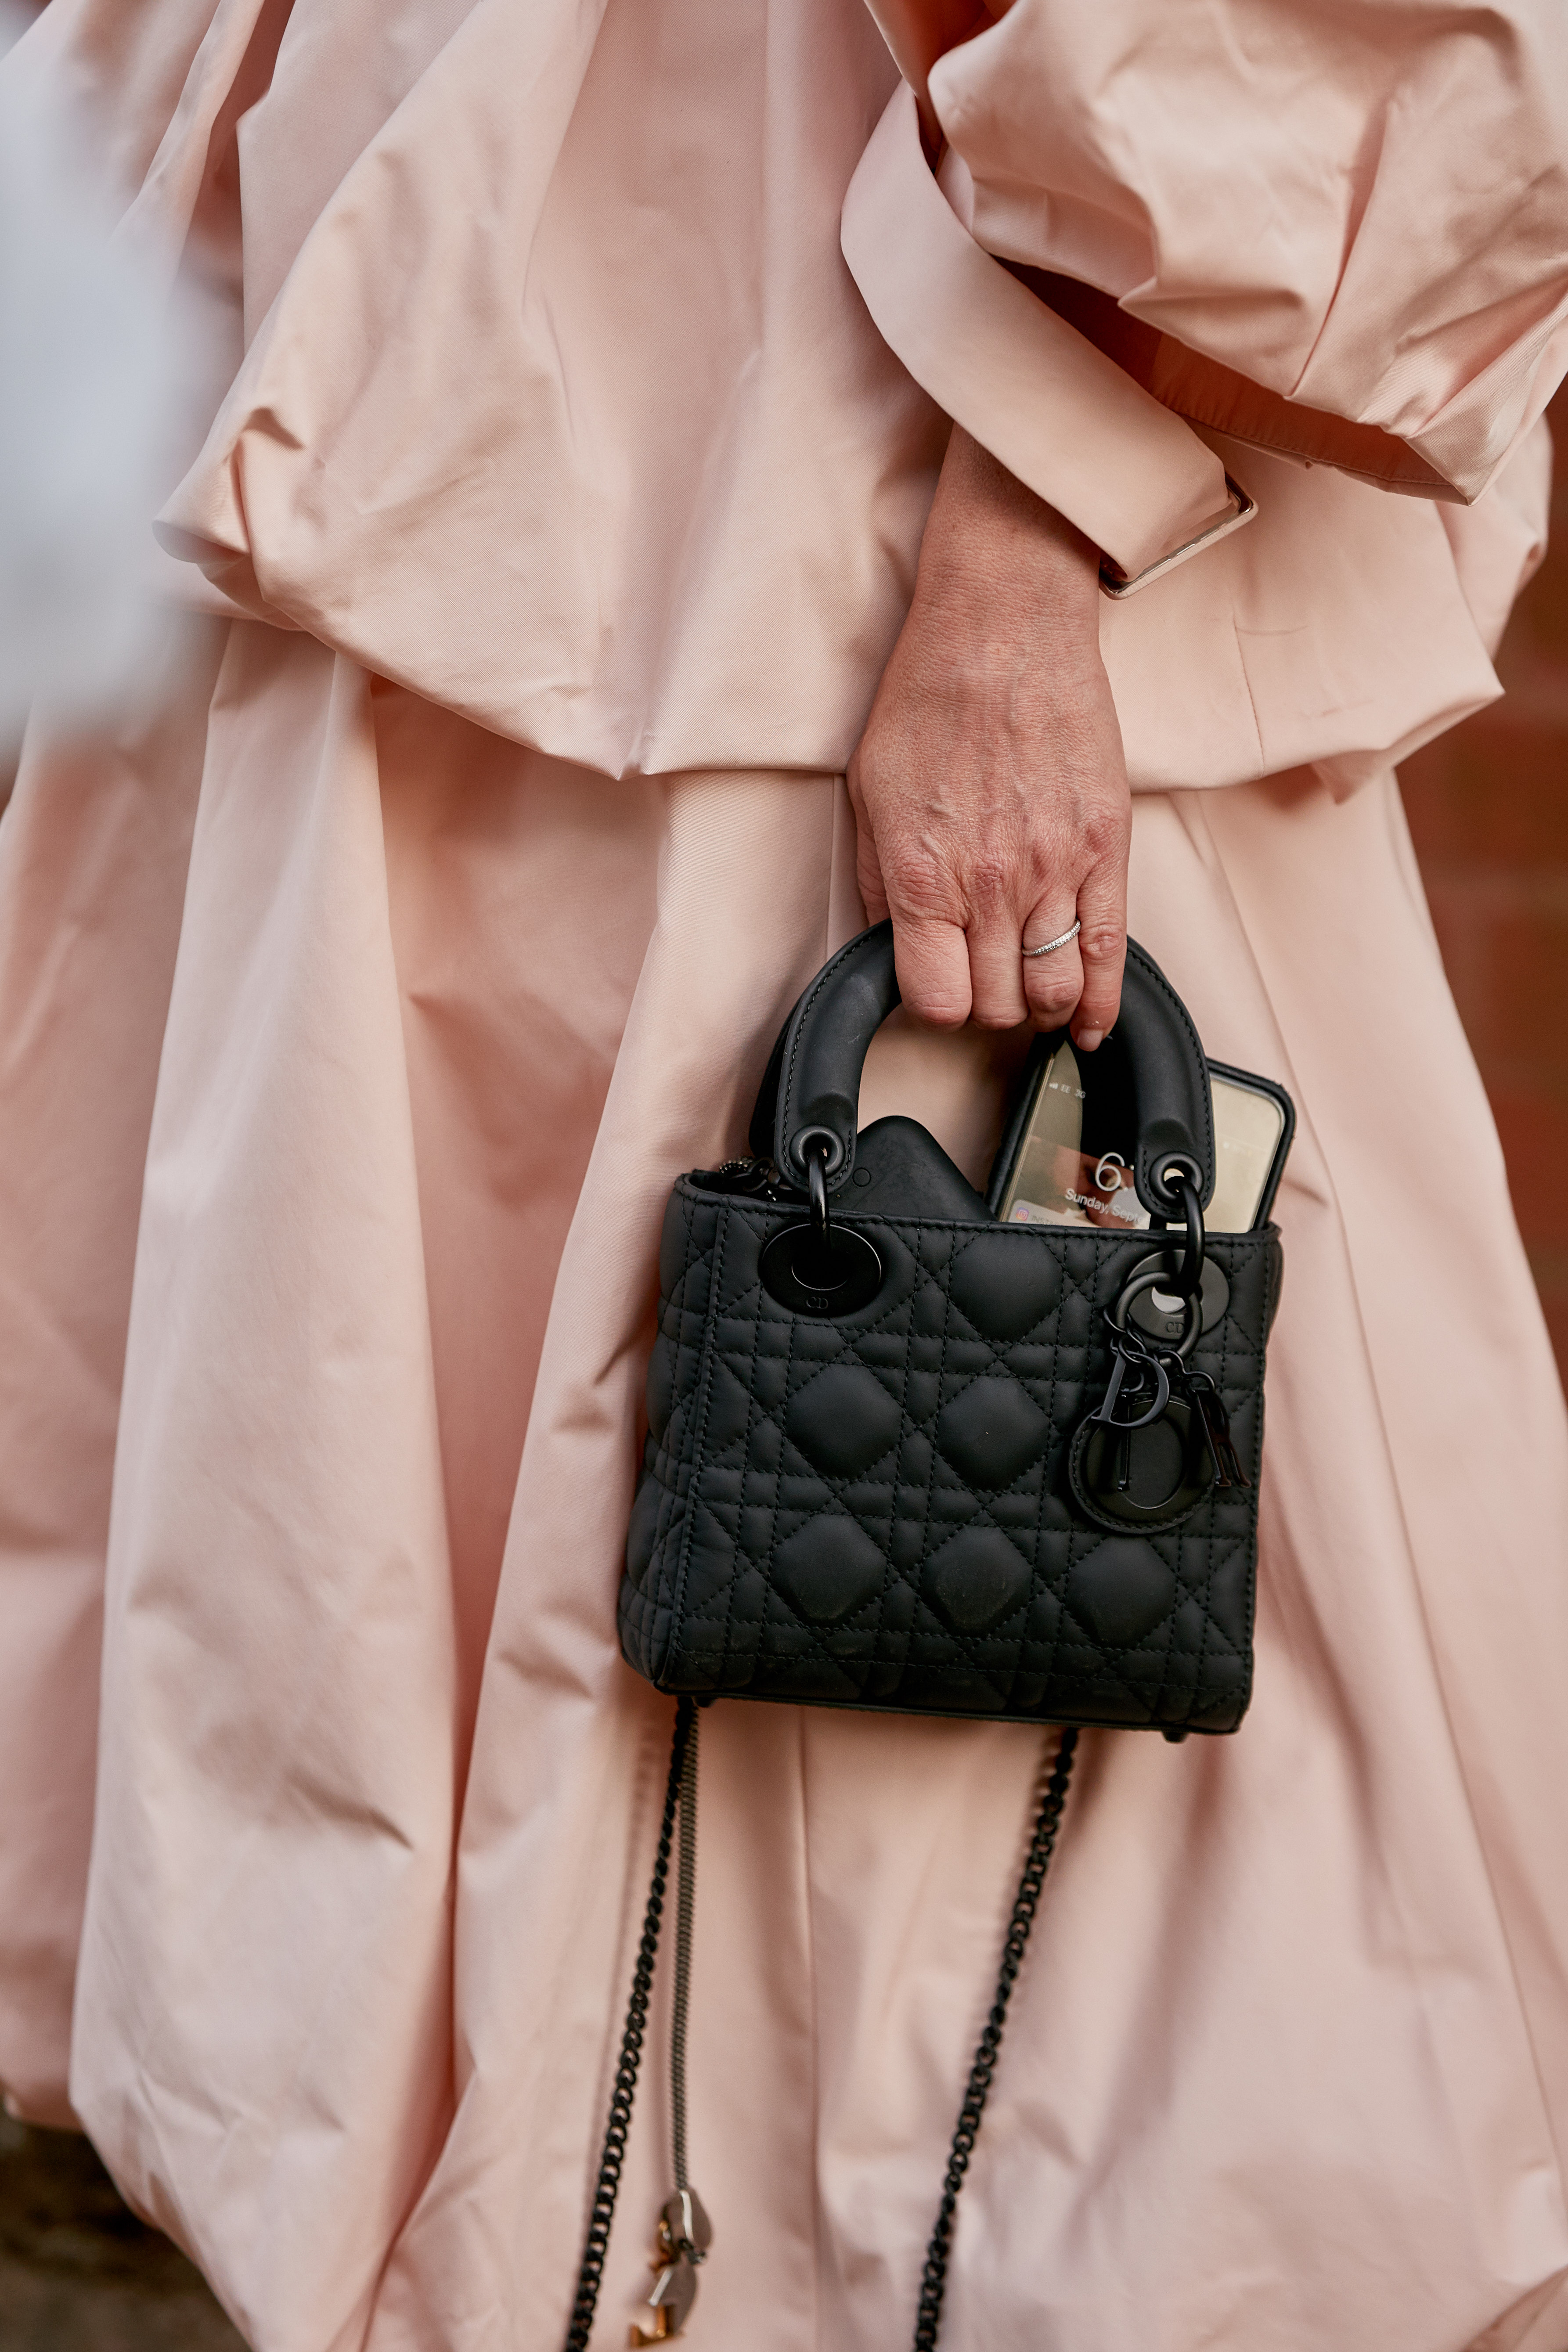 Five Louis Vuitton handbags & purses worth the investment